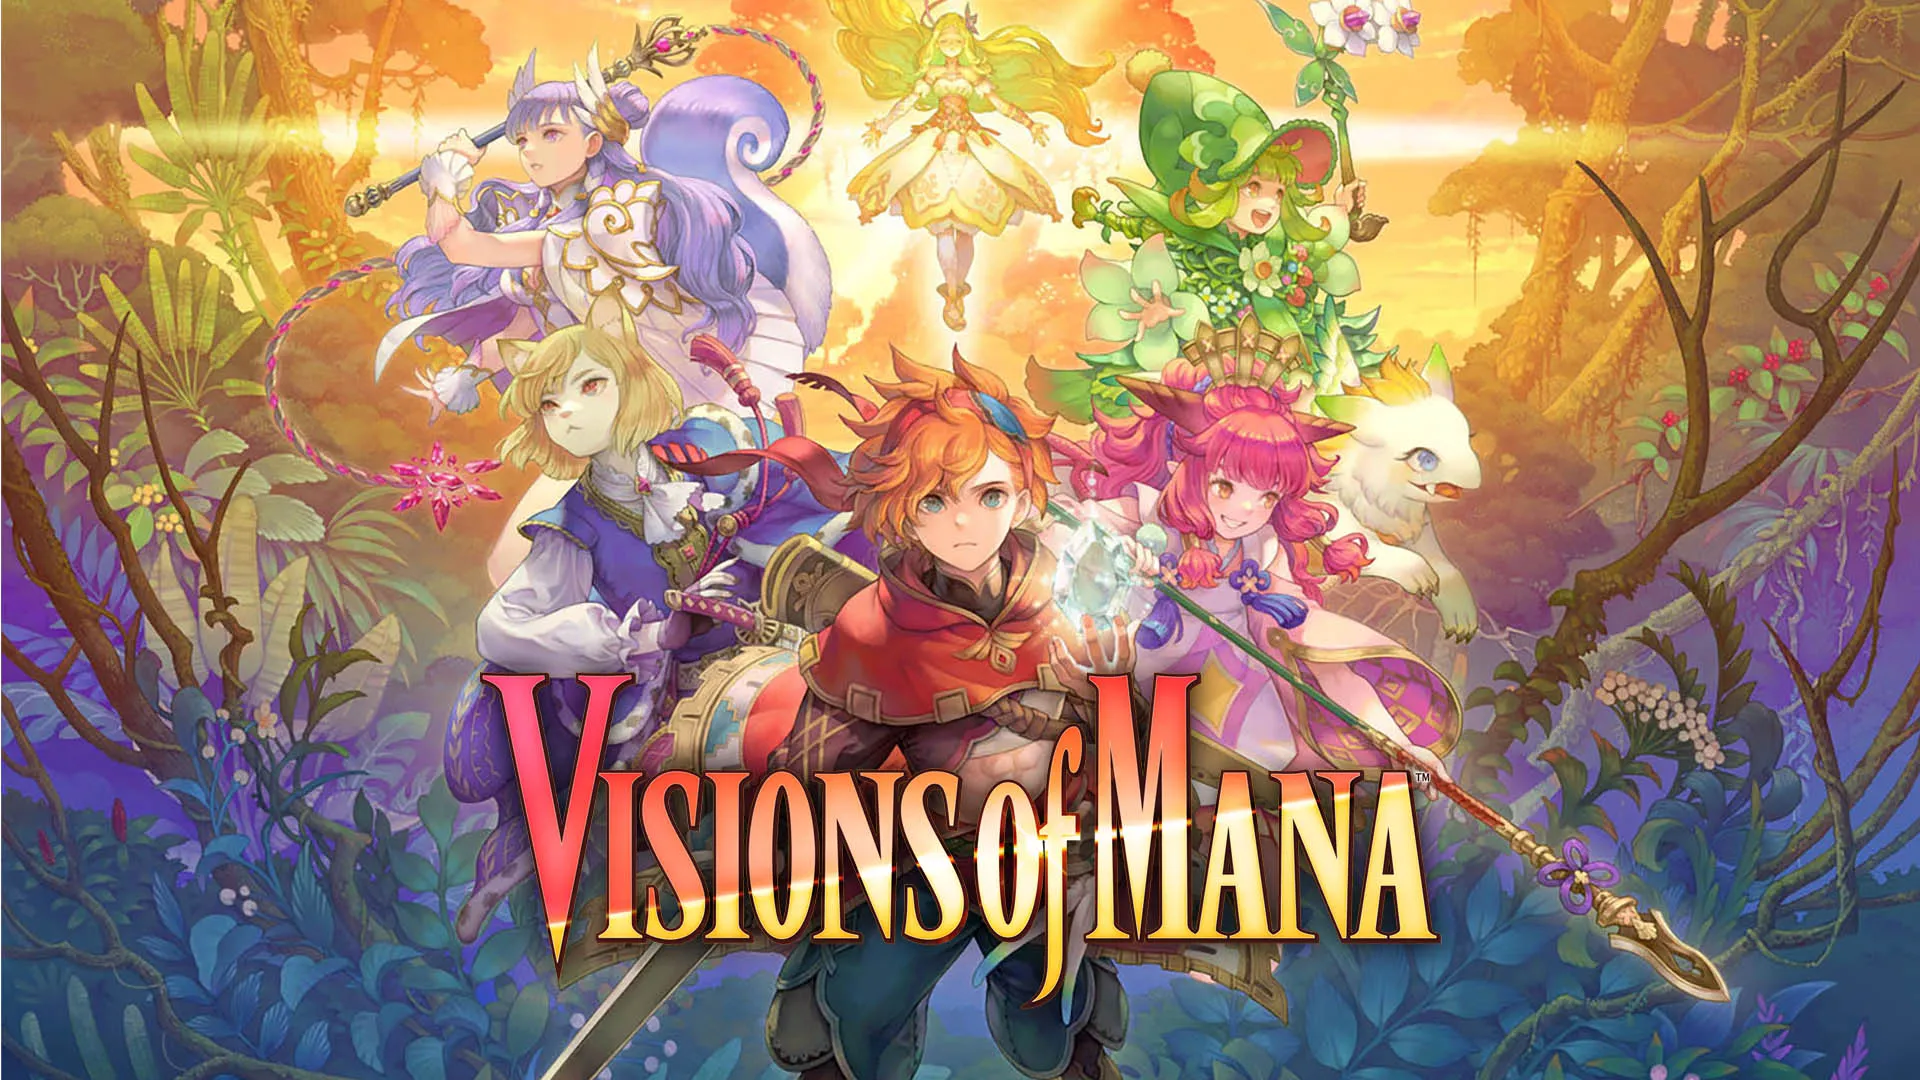 The box art for Visions of Mana